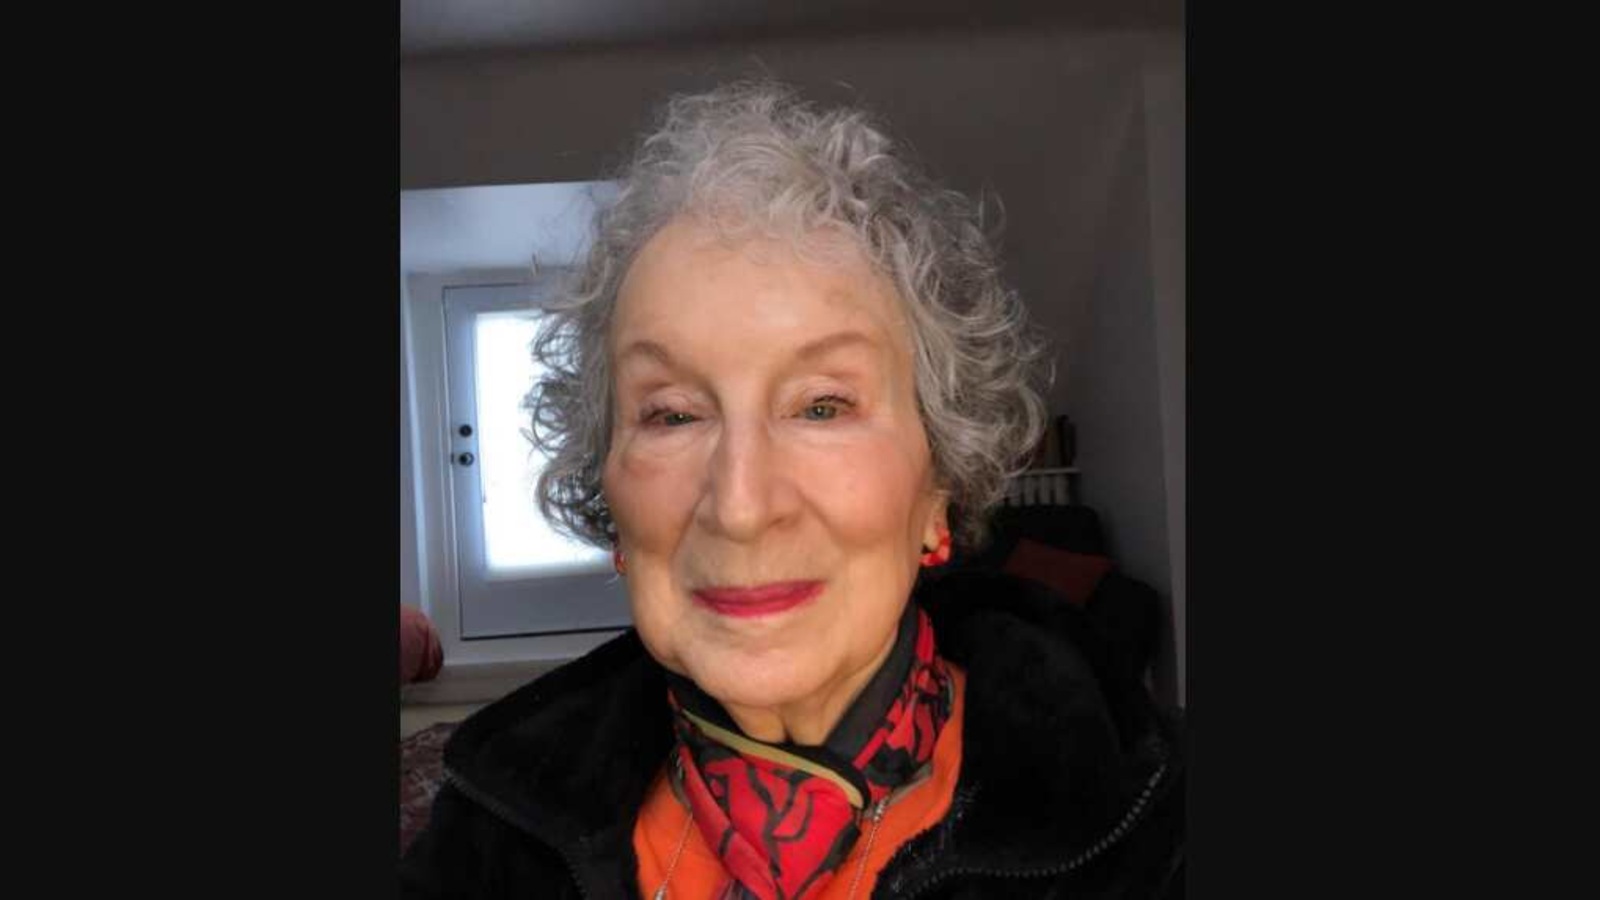 Margaret Atwood S Zoom Cat Filter Mishap Related Tweet Sparks Laughter Hindustan Times